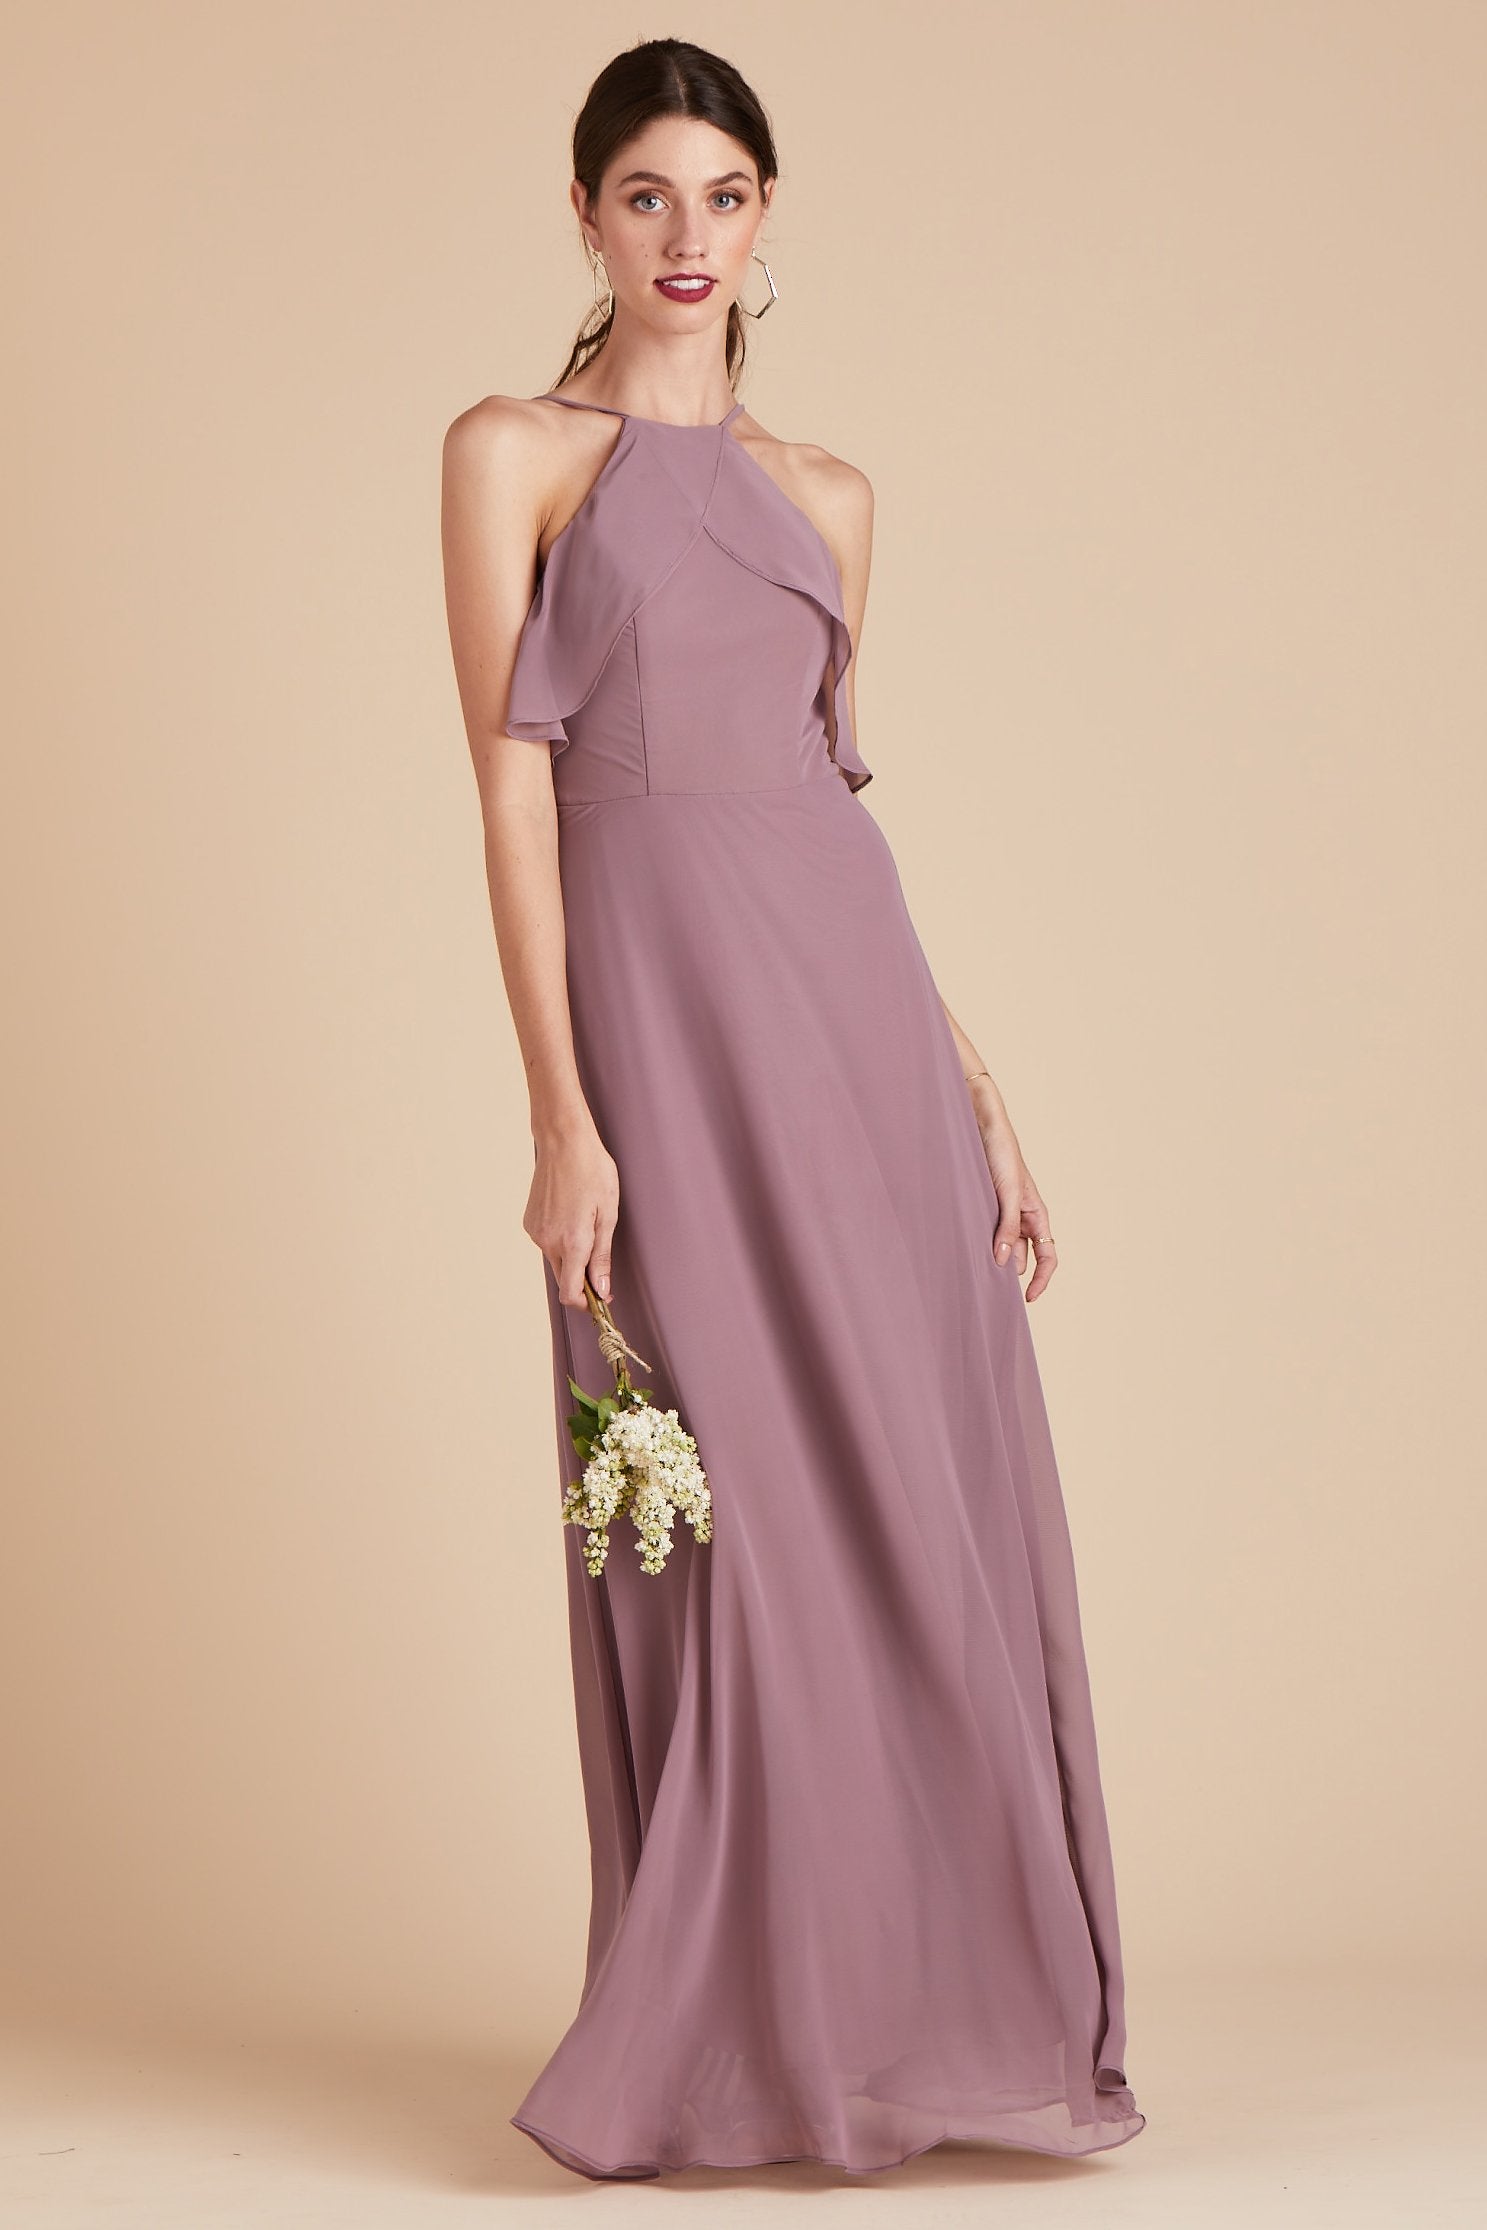 Jules bridesmaid dress in dark mauve chiffon by Birdy Grey, front view